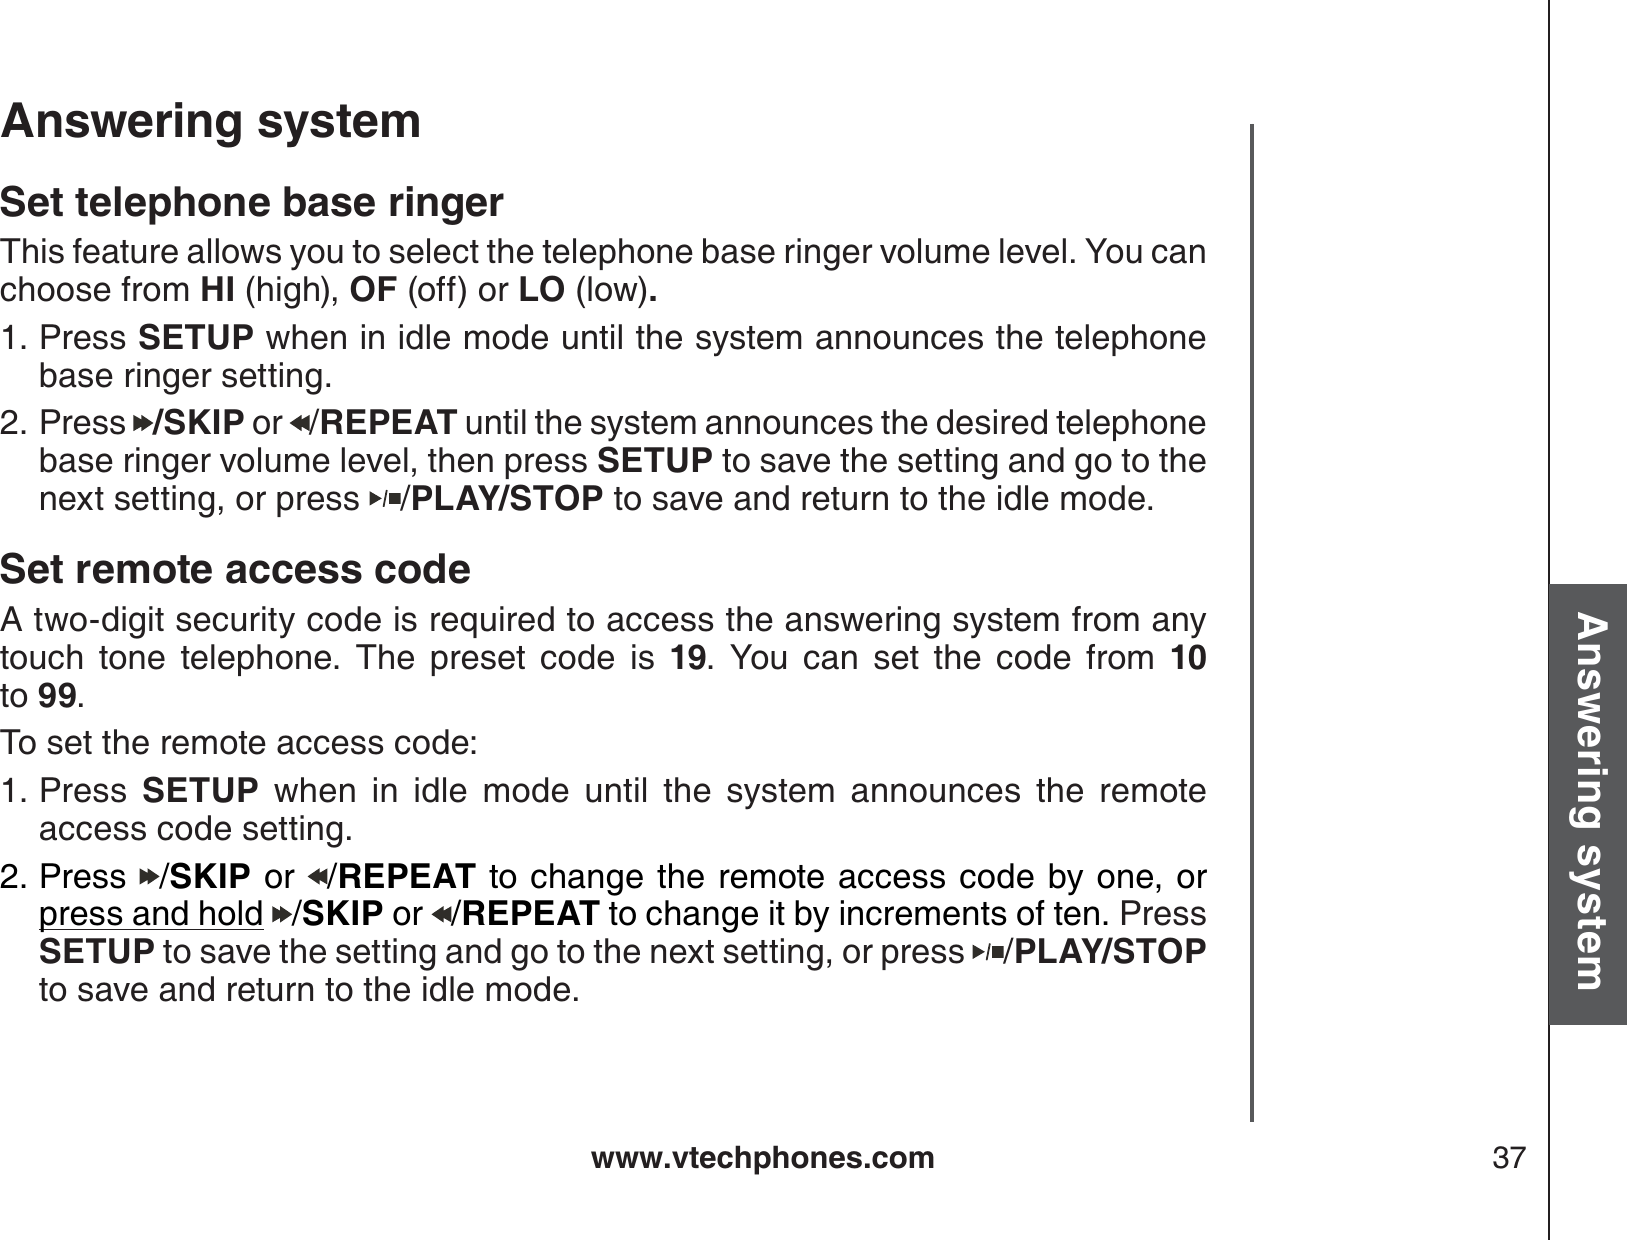 www.vtechphones.com 37Basic operationAnswering systemAnswering system Set telephone base ringerThis feature allows you to select the telephone base ringer volume level. You can choose from HI (high), OF (off) or LO (low).Press SETUP when in idle mode until the system announces the telephone base ringer setting.Press  /SKIP or  /REPEAT until the system announces the desired telephone base ringer volume level, then press SETUP to save the setting and go to the next setting, or press  /PLAY/STOP to save and return to the idle mode.Set remote access code A two-digit security code is required to access the answering system from any touch tone telephone. The preset code is 19. You can set the code from 10           to 99.To set the remote access code:Press  SETUP when in idle mode until the system announces the remote access code setting.Press /SKIP or /REPEAT to change the remote access code by one, or press and hold /SKIP or /REPEAT to change it by increments of ten. Press SETUP to save the setting and go to the next setting, or press  /PLAY/STOP to save and return to the idle mode.1.2.1.2.